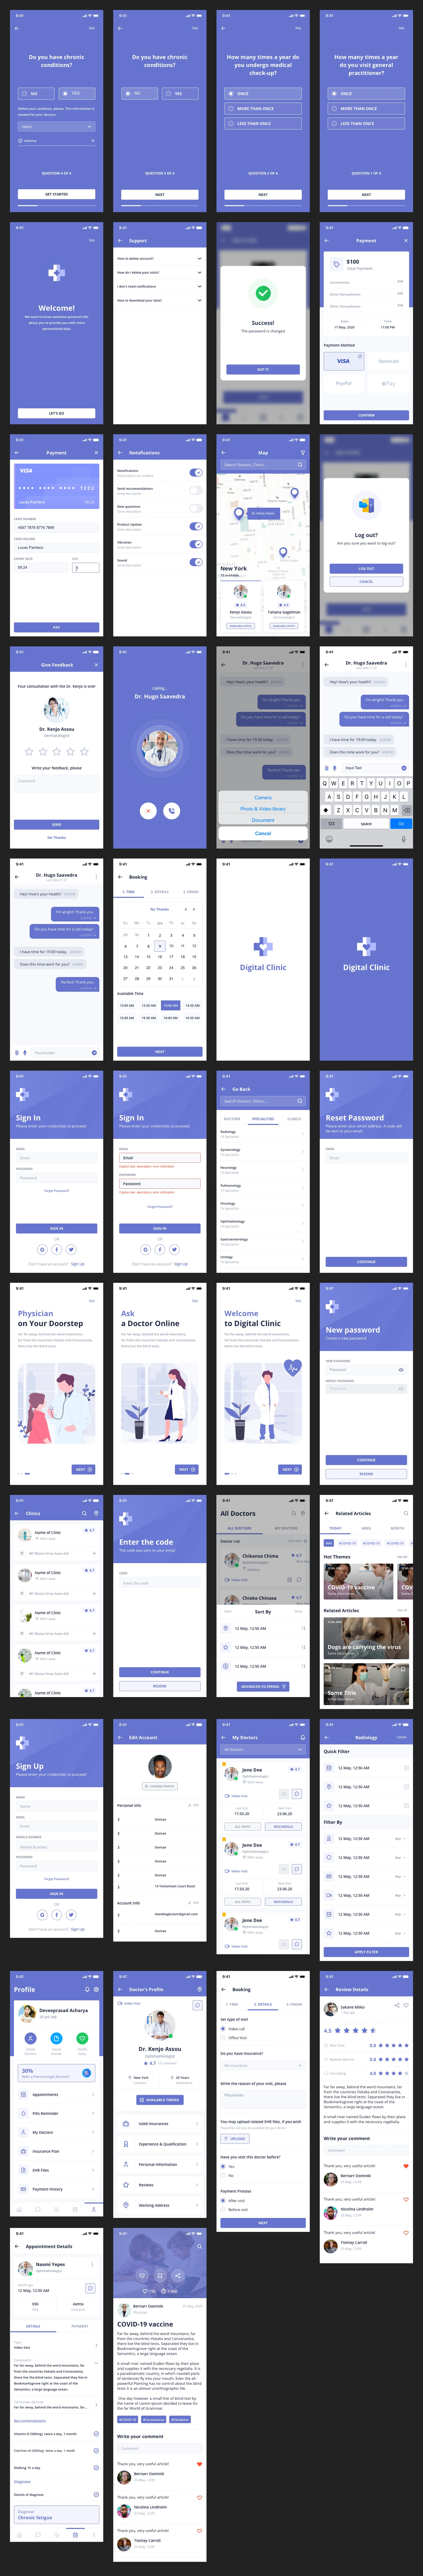 Digital Clinic Free UI Kit for Sketch - A Digital Clinic UI Kit based on Eva Design System contains 50+ general-purpose mobile screens designed with the best UX/UI practices. UI Kit will help you to create a clear and functional interface for your next mobile app faster.